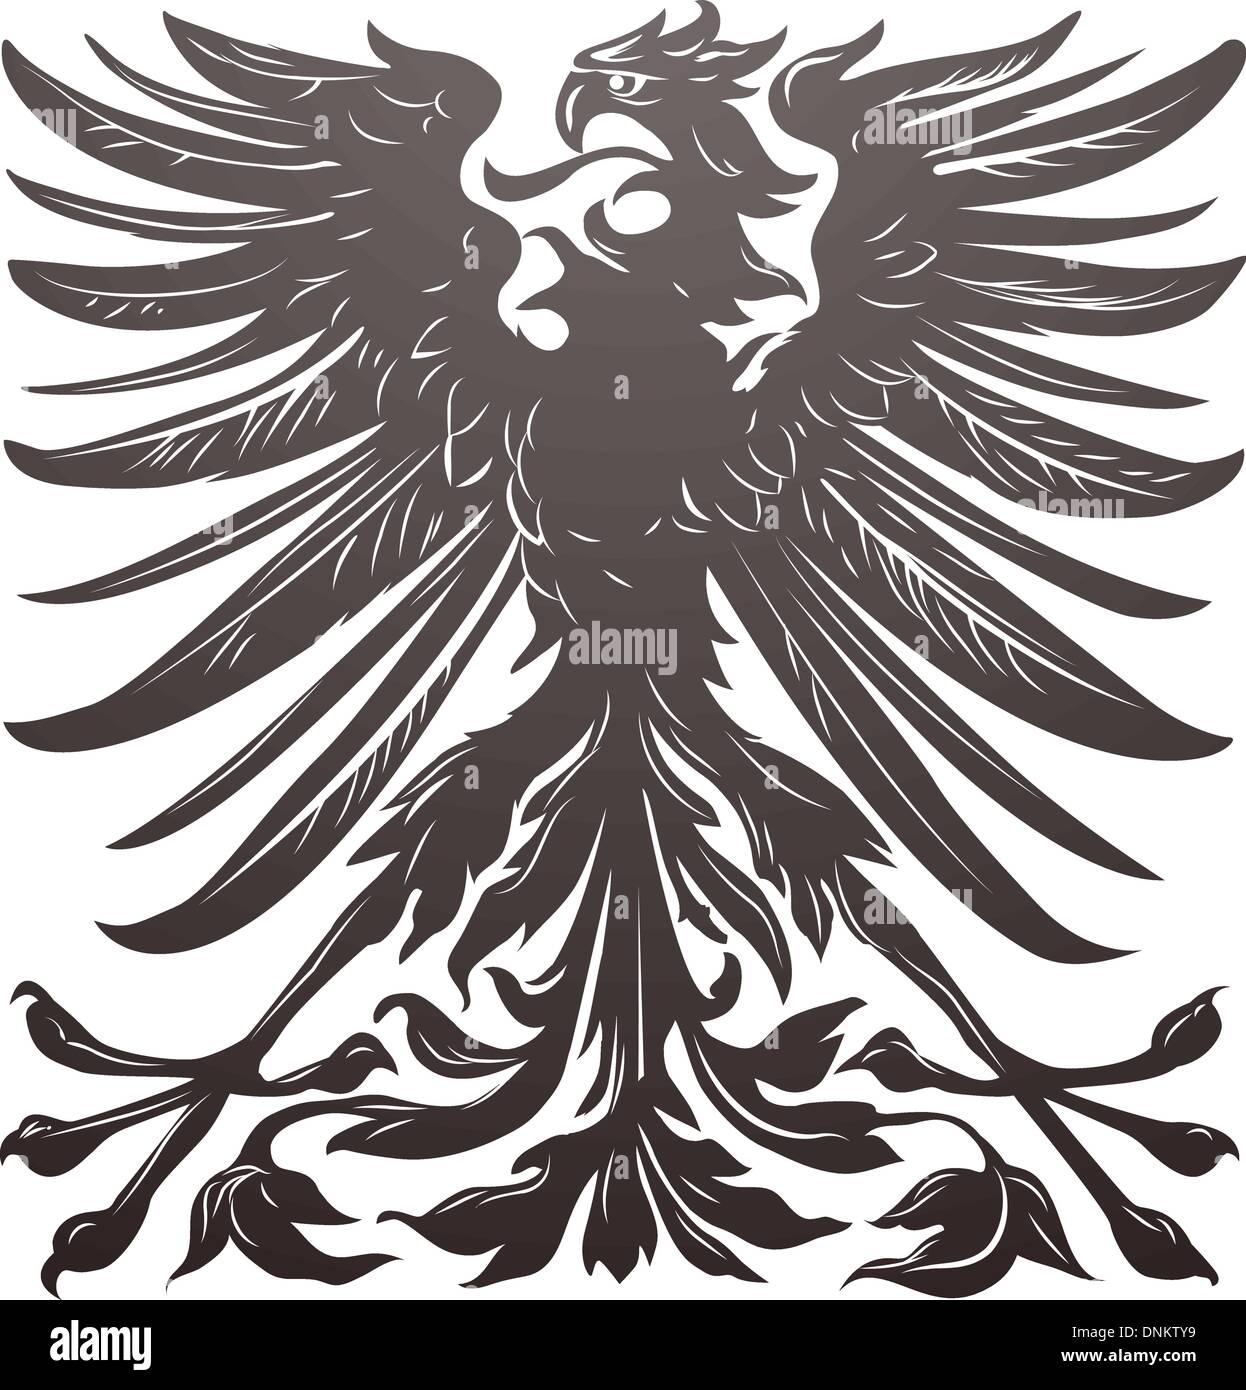 Imperial eagle most resembling that used on the coat of arms of the German empire in the late 19th century. Stock Vector